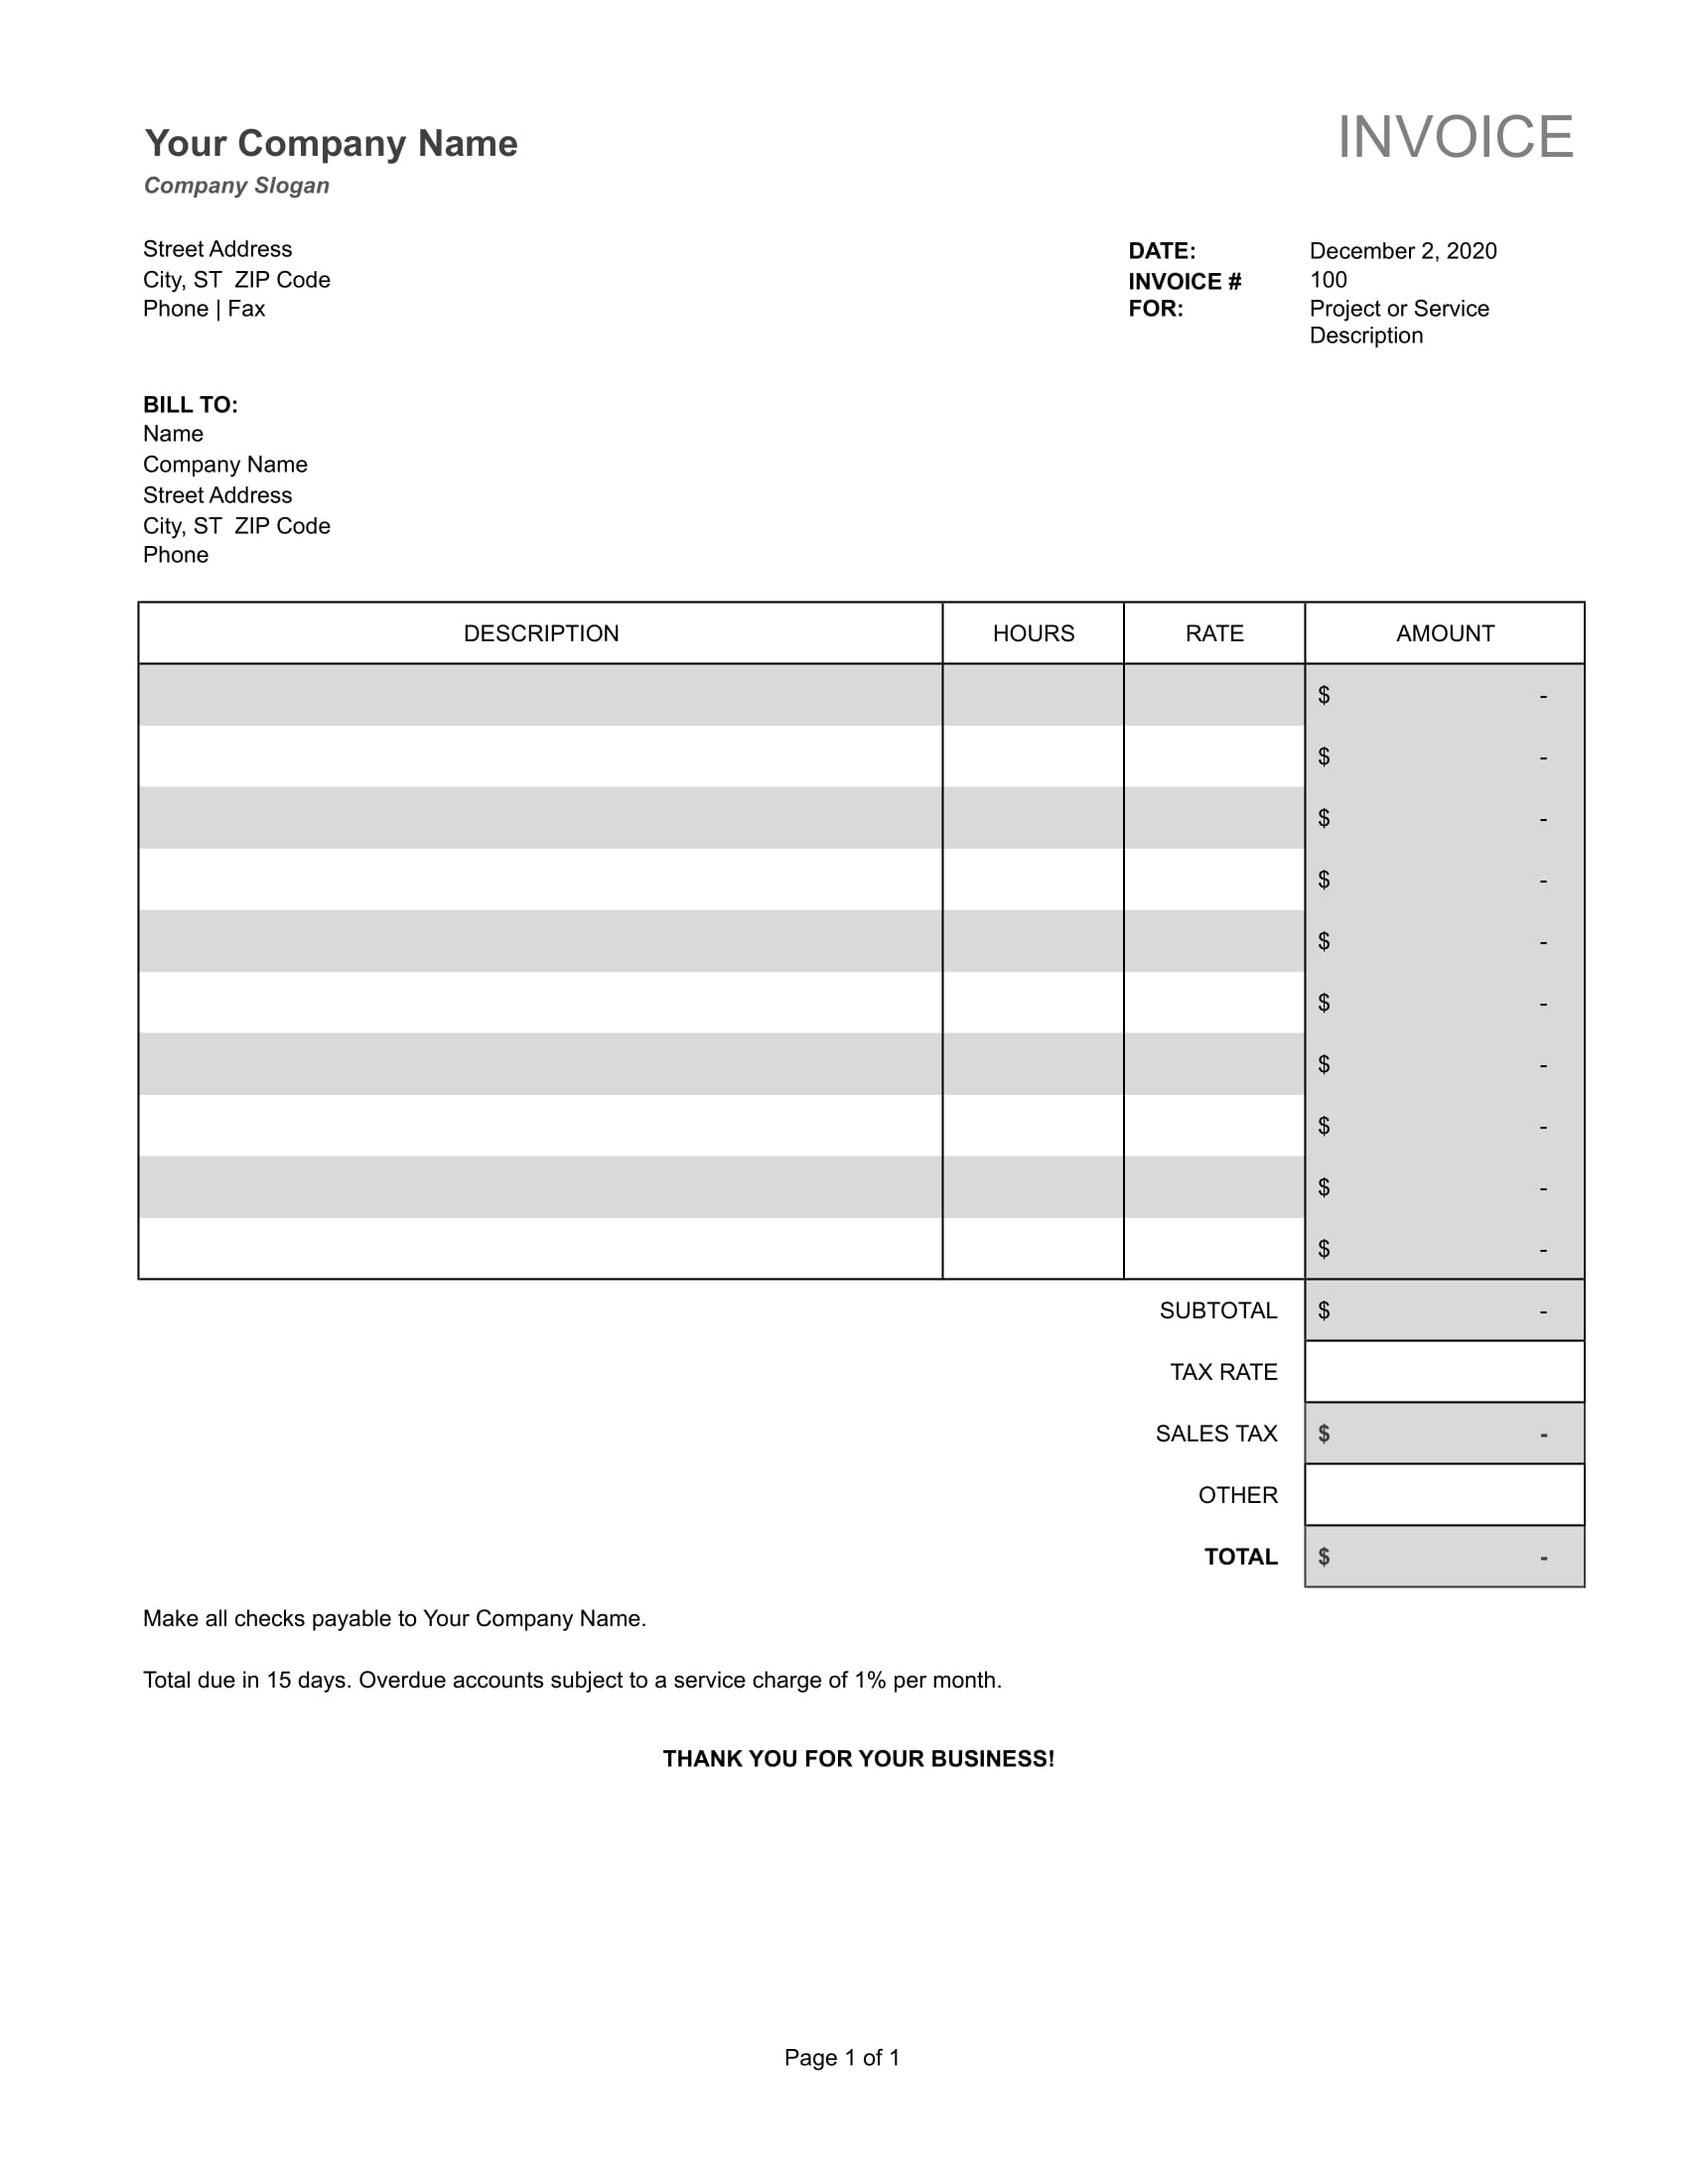 Time-based Service Excel Invoice Template